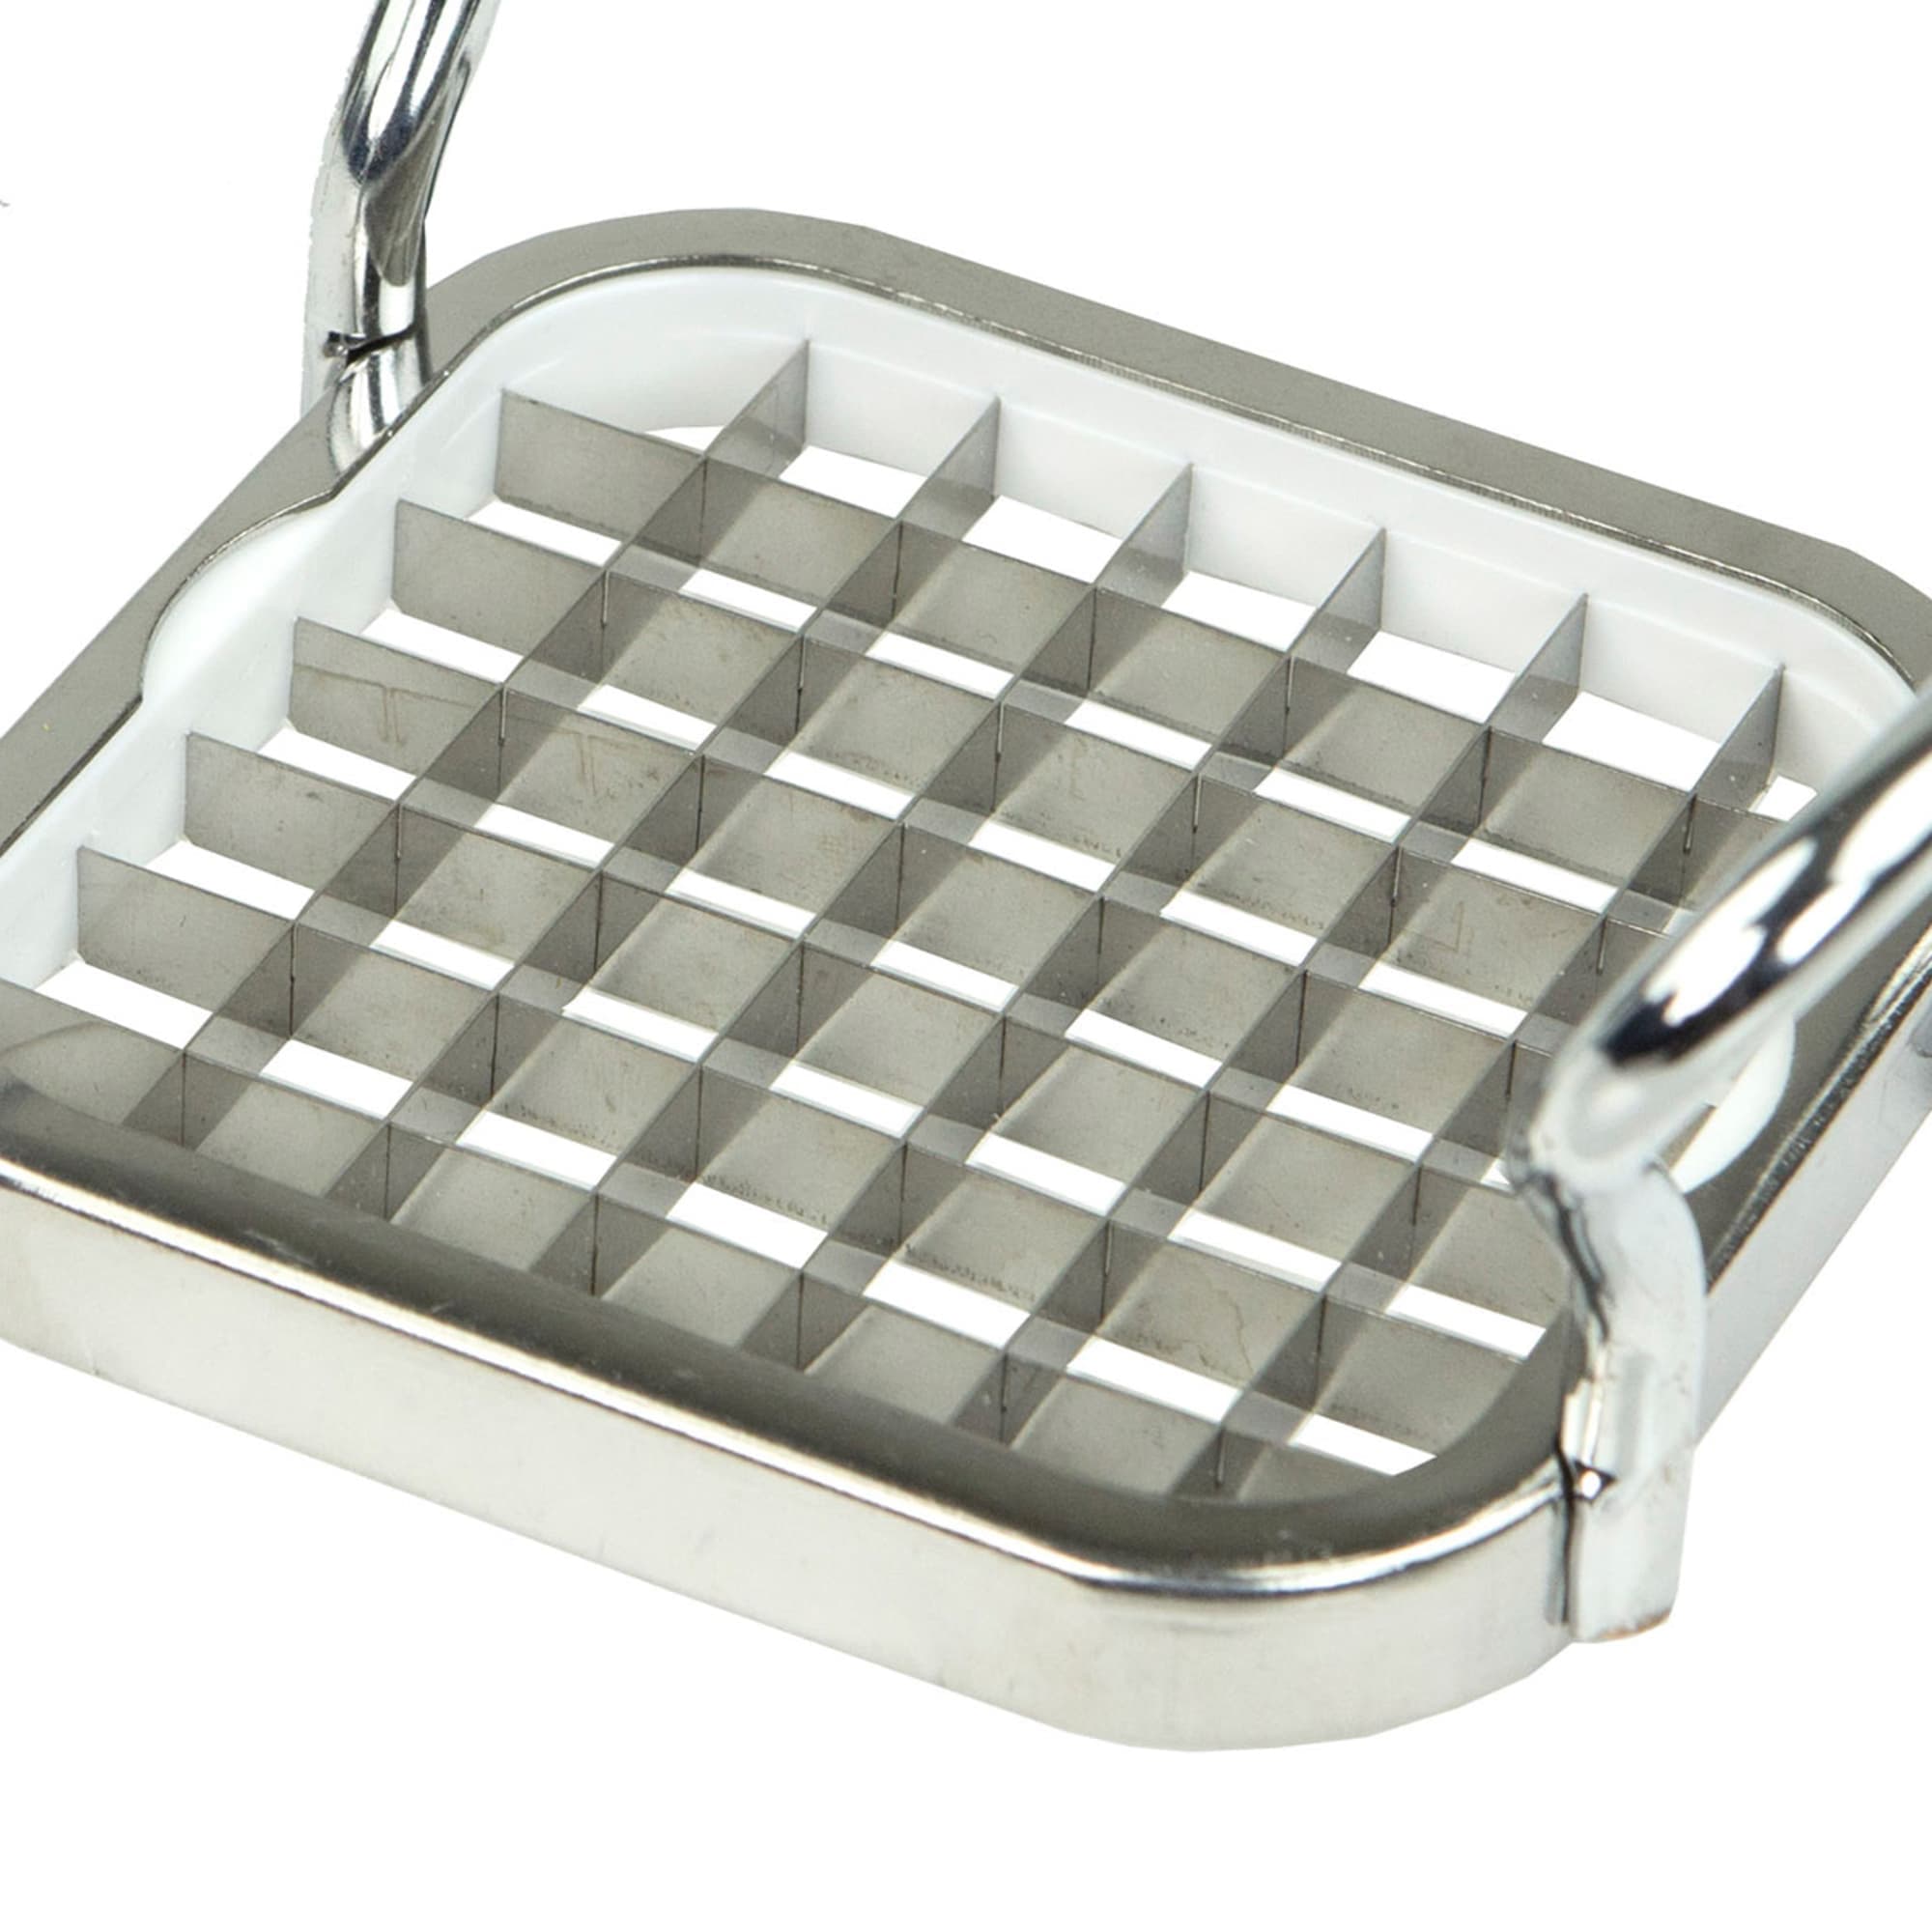 Home Basics Stainless Steel French Fry Cutter $4.00 EACH, CASE PACK OF 24